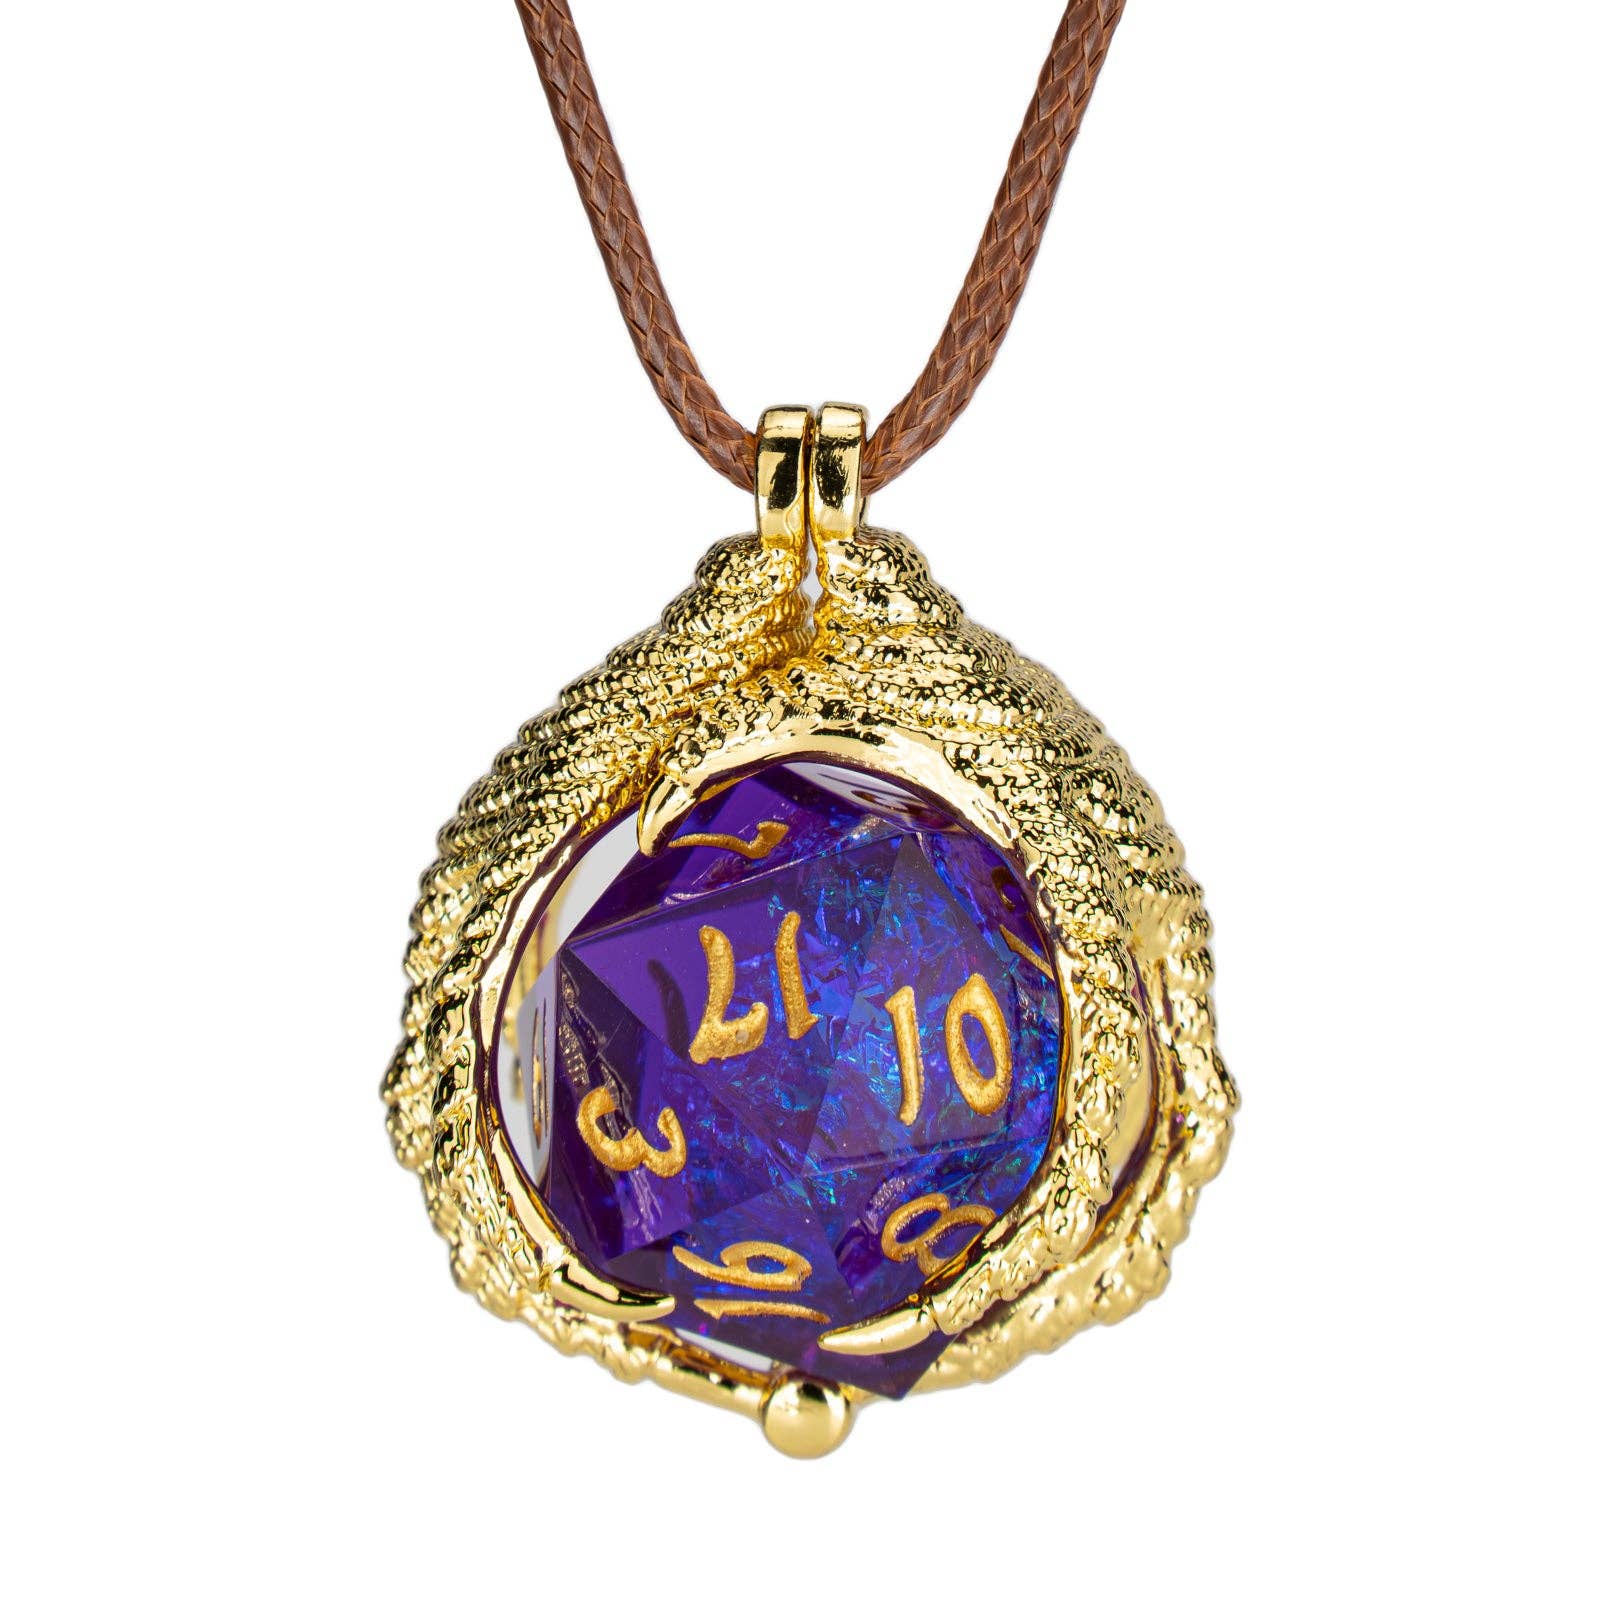 Dragon Claw Necklace with D20 - Gold